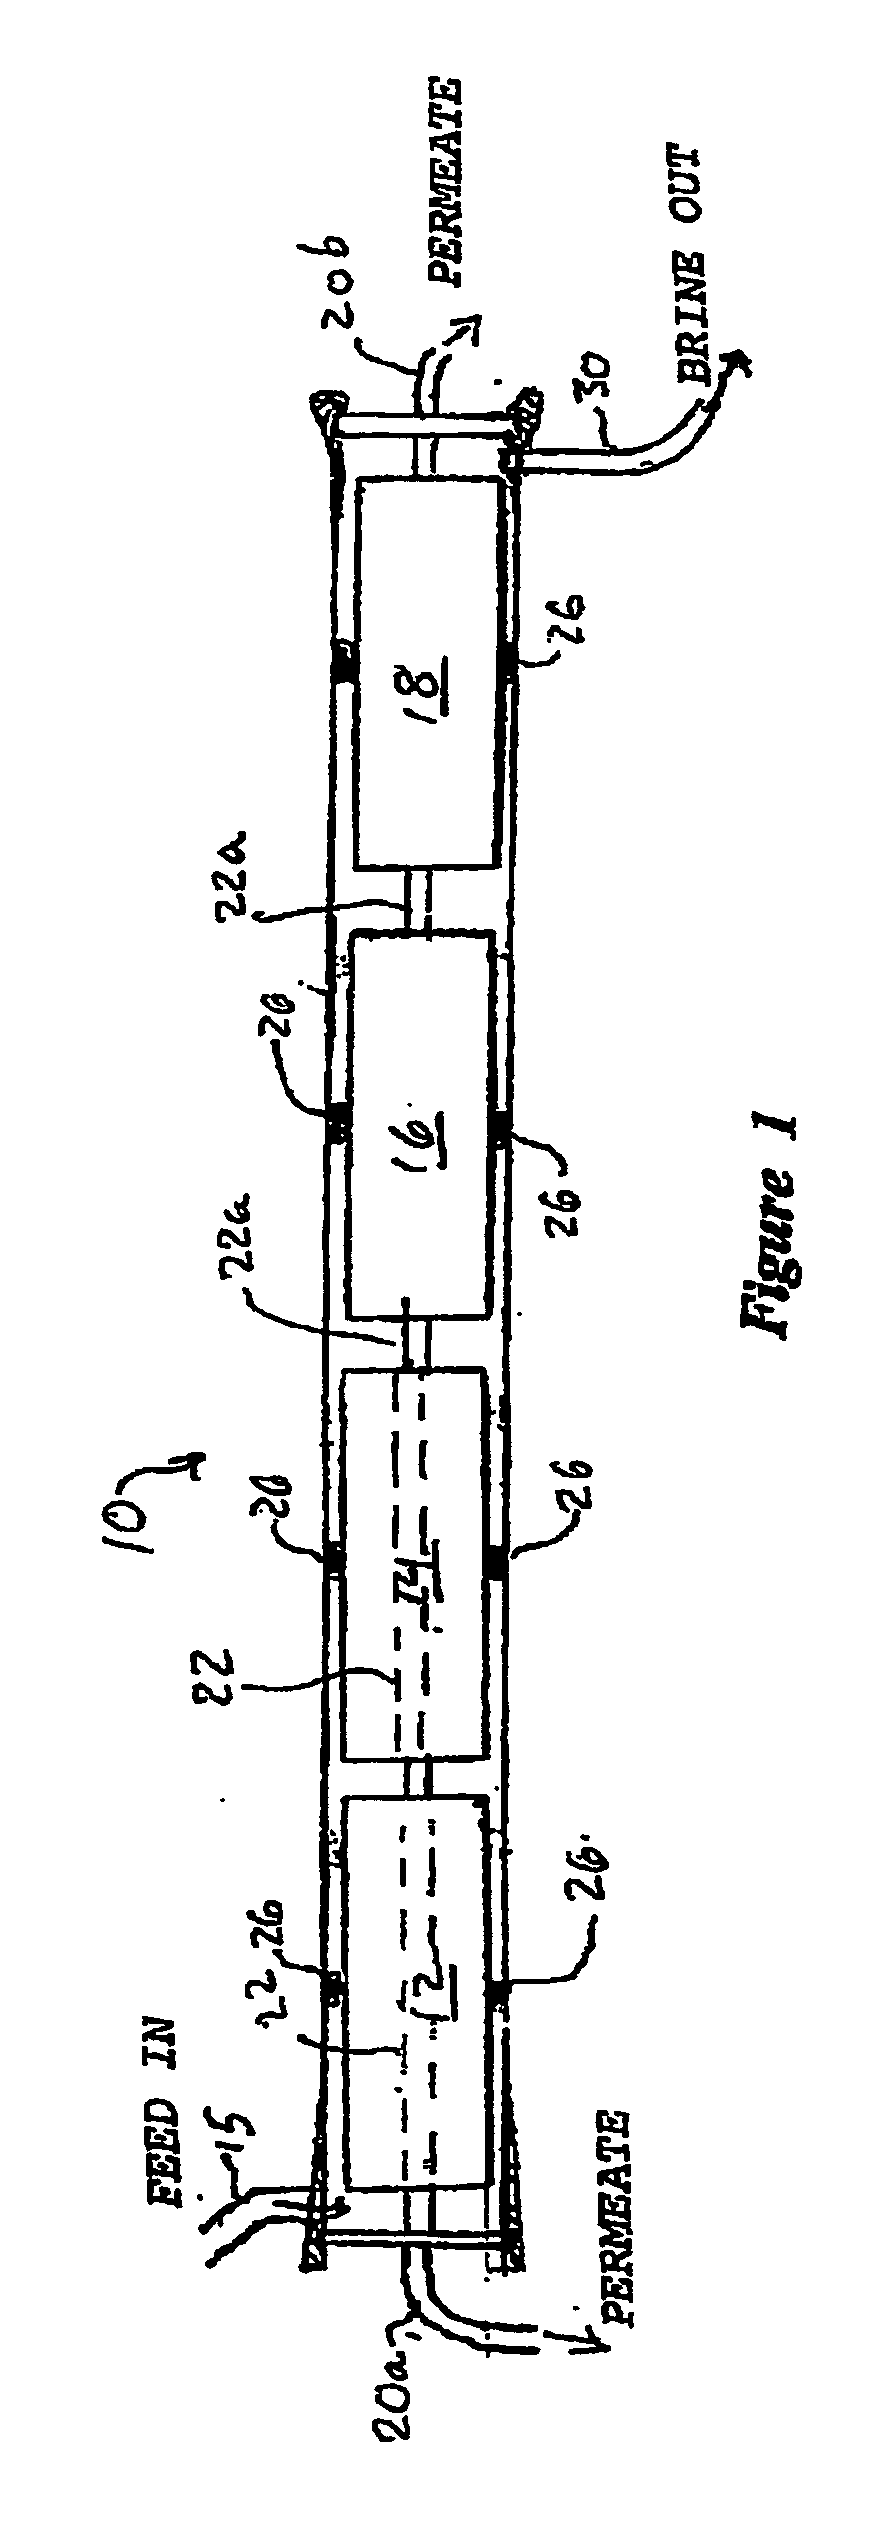 Branched flow filtraction and system